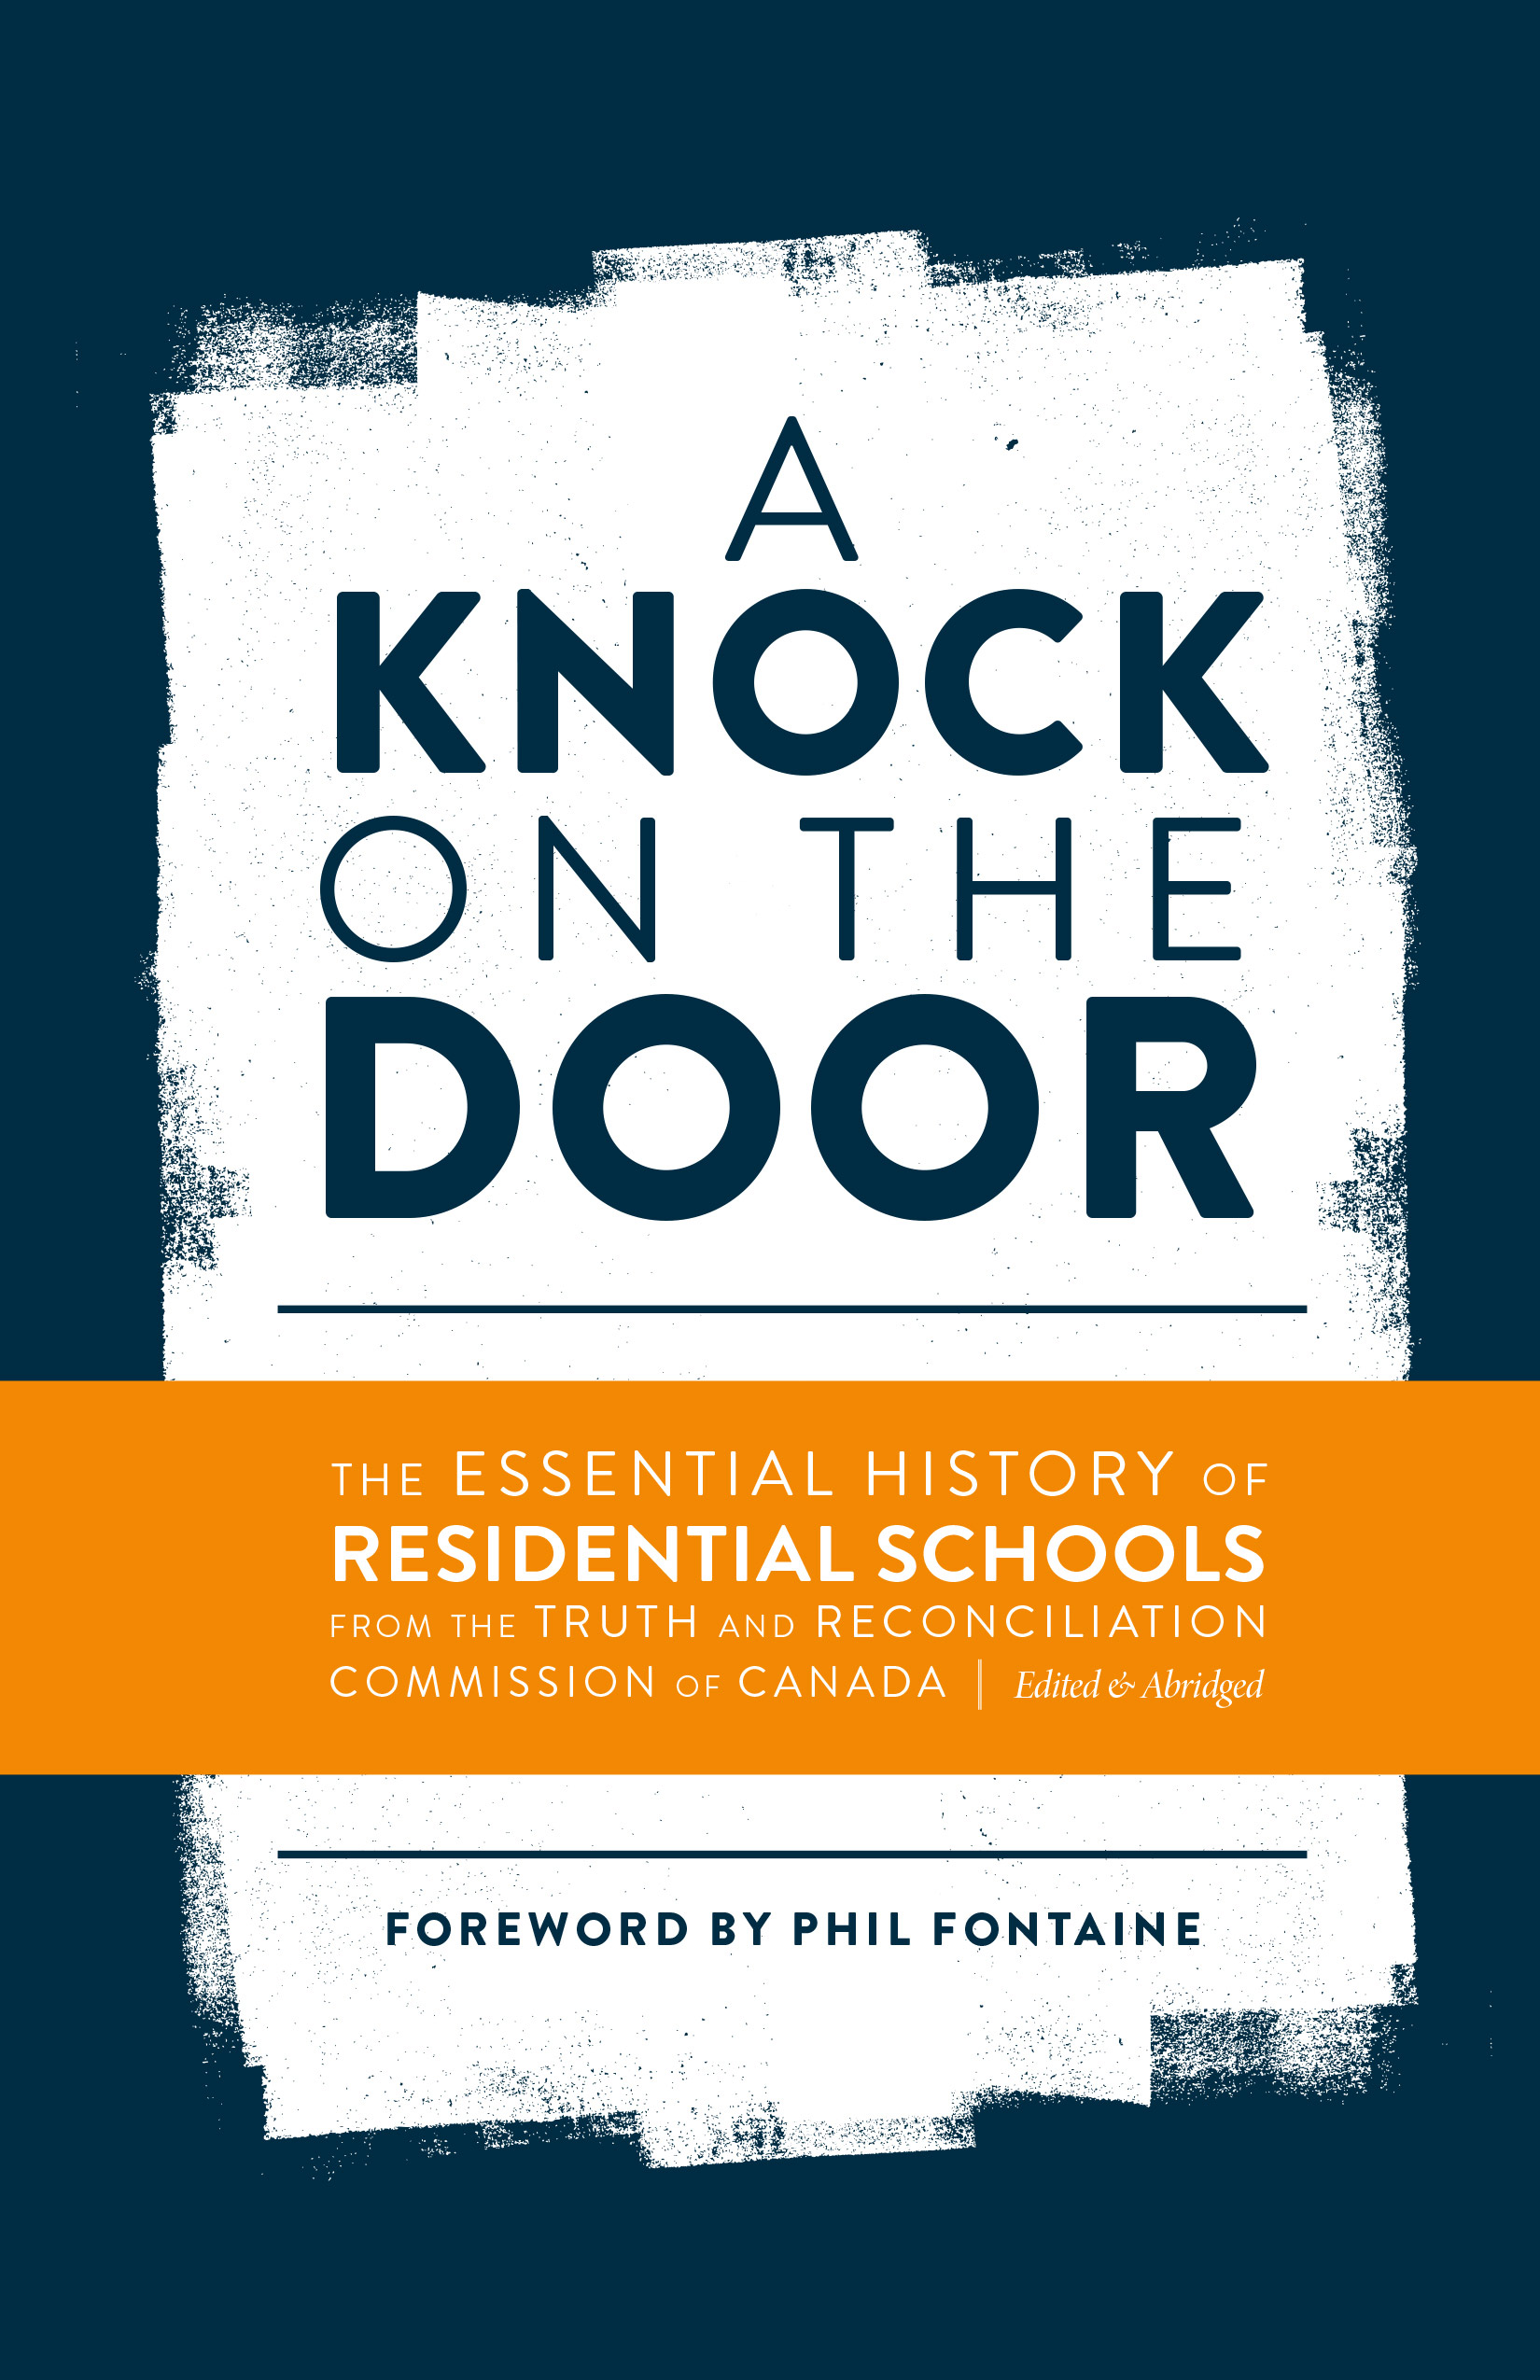 A Knock on the Door : The Essential History of Residential Schools from the Truth and Reconciliation Commission of Canada, Edited and Abridged | History & Society